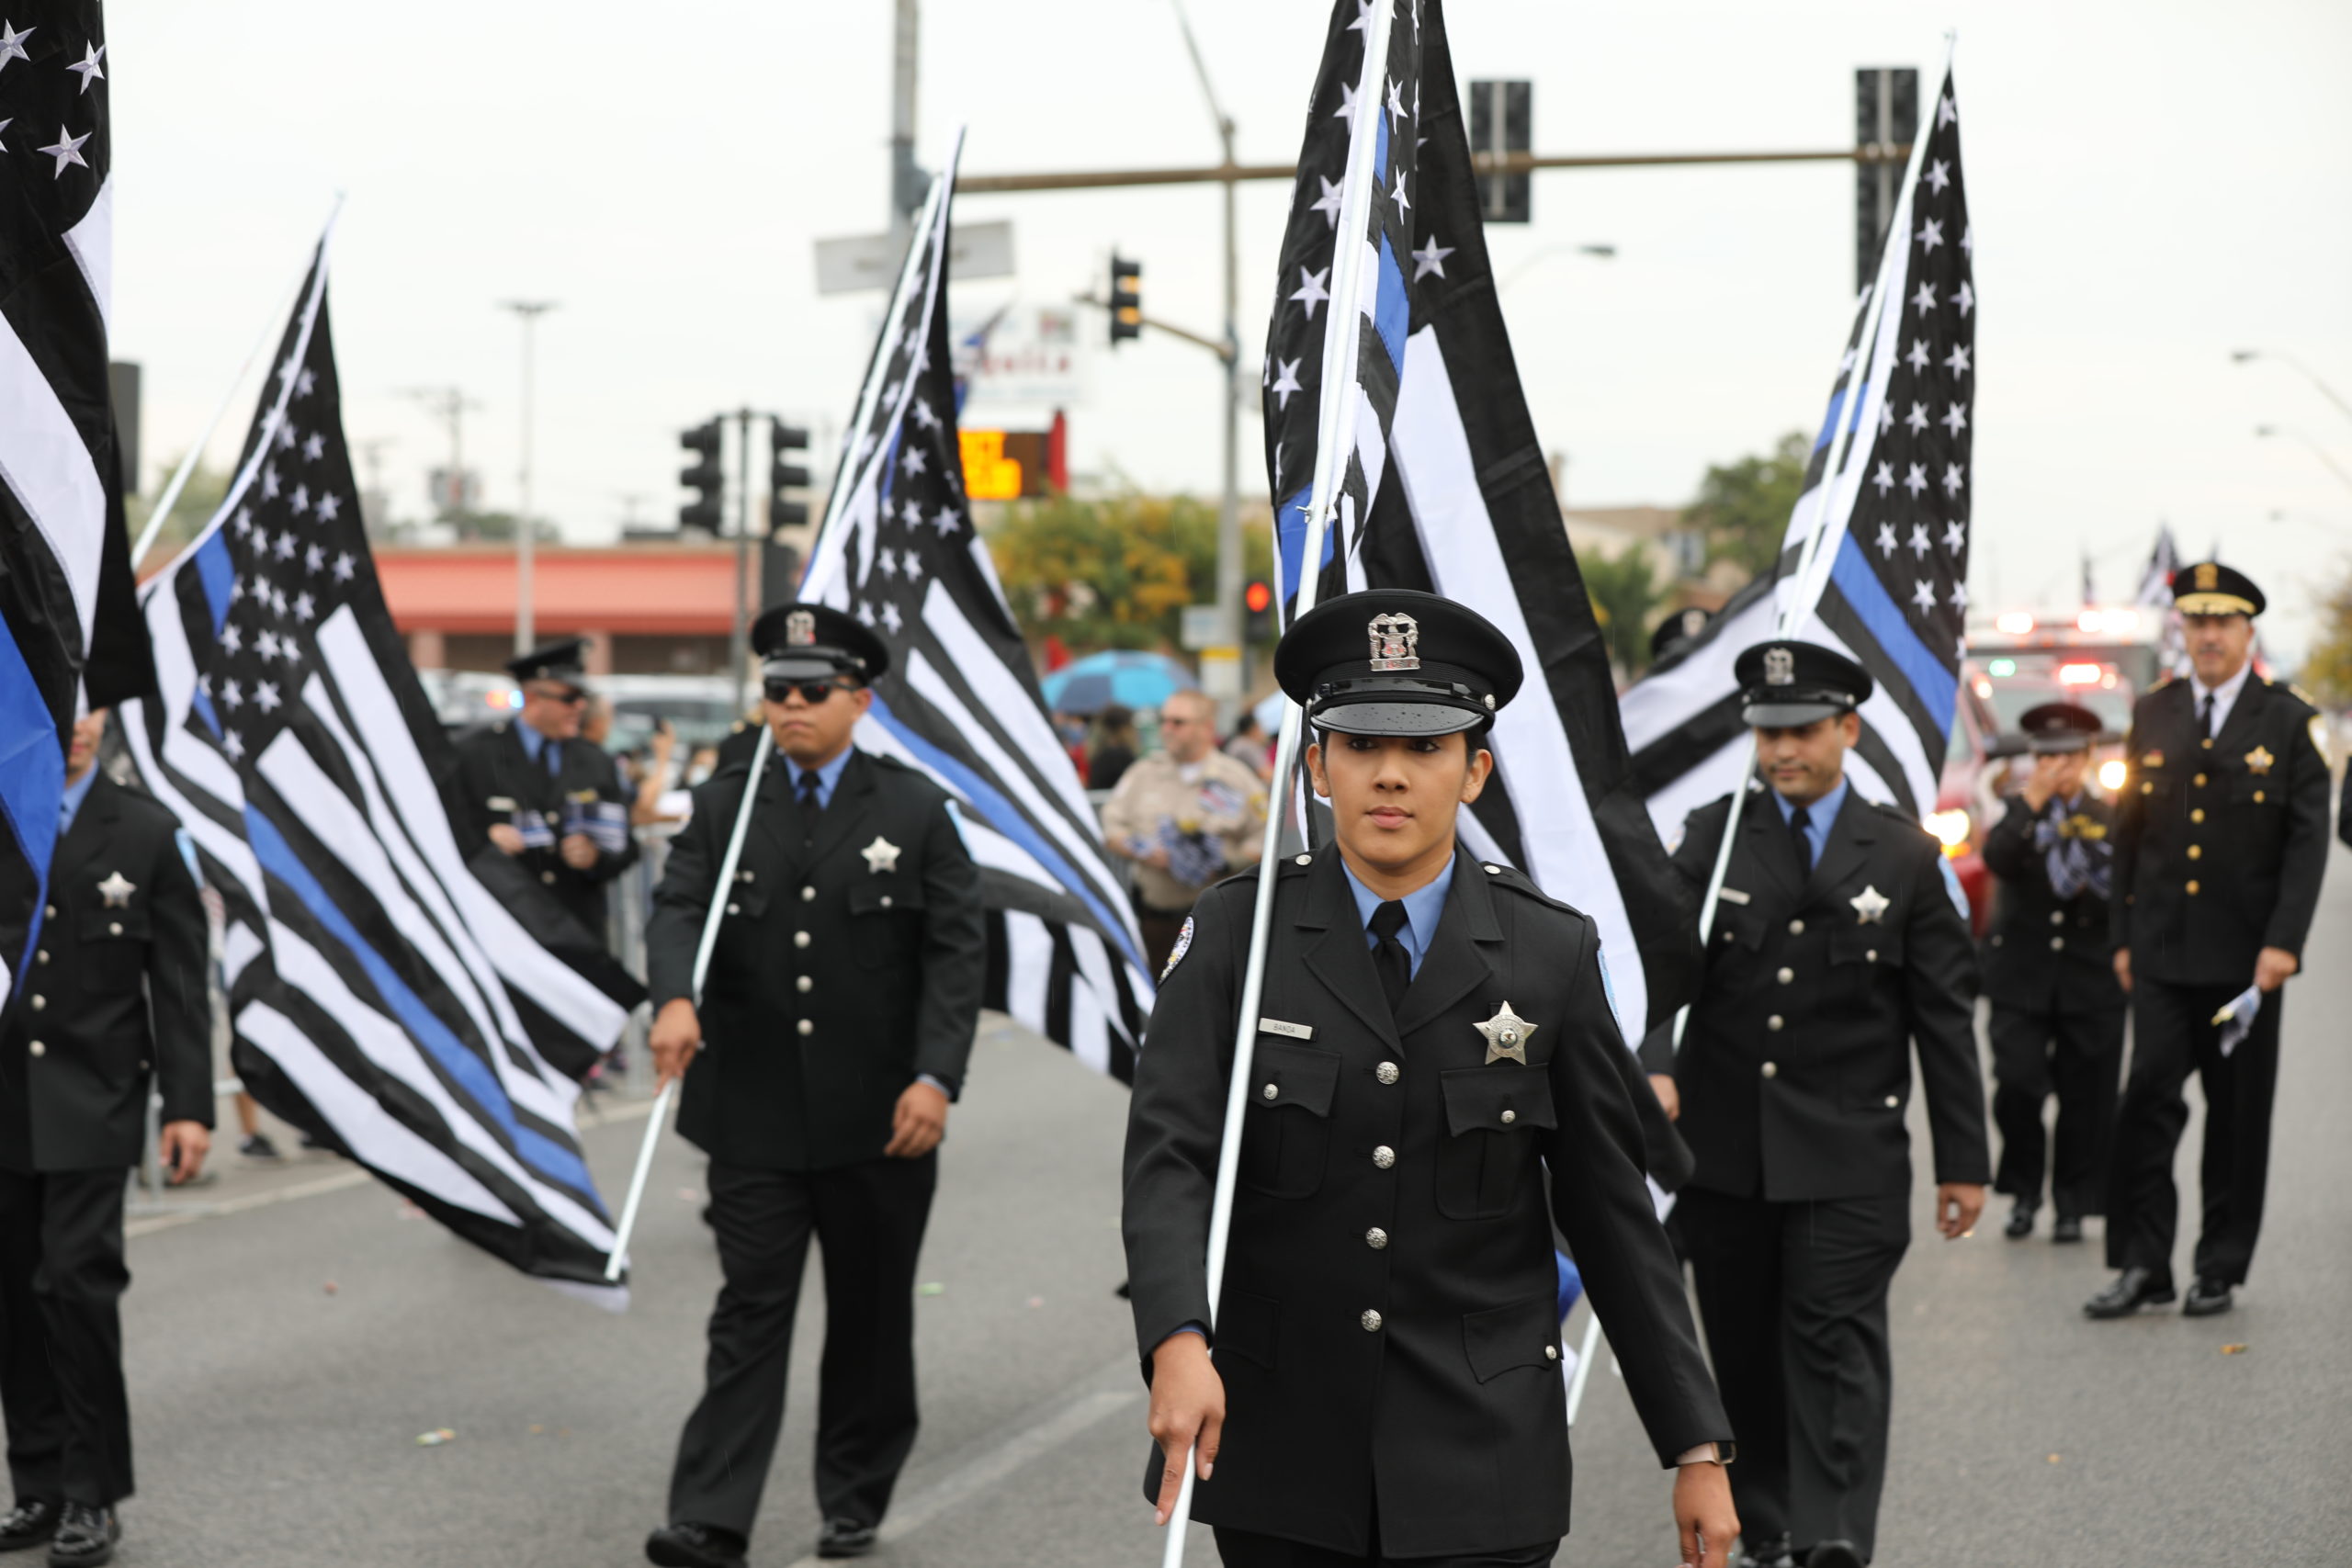 Cicero Police officers were among the participants honored at the 53rd Annual Houby Parade on Sunday Oct. 10, 2021